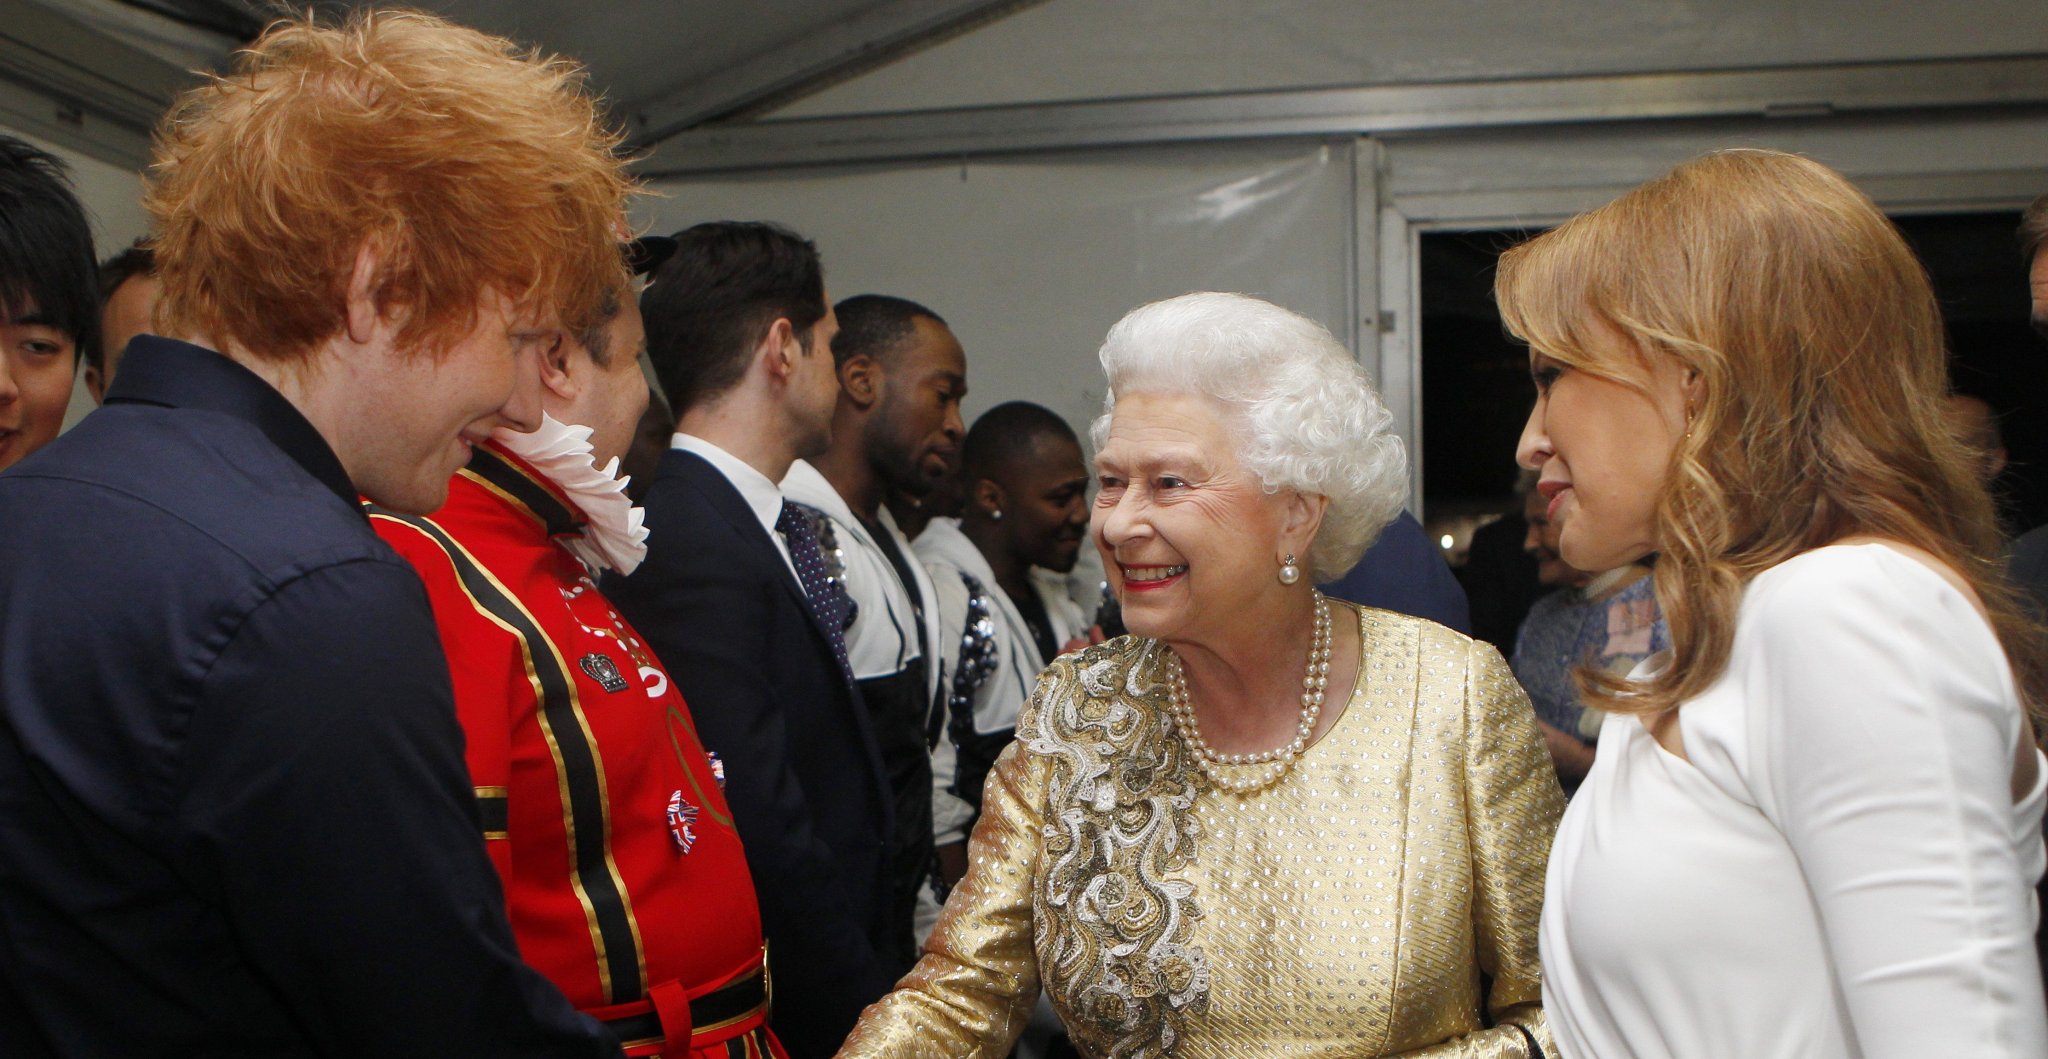 10 Musicians Who Performed In Front Of Royalty